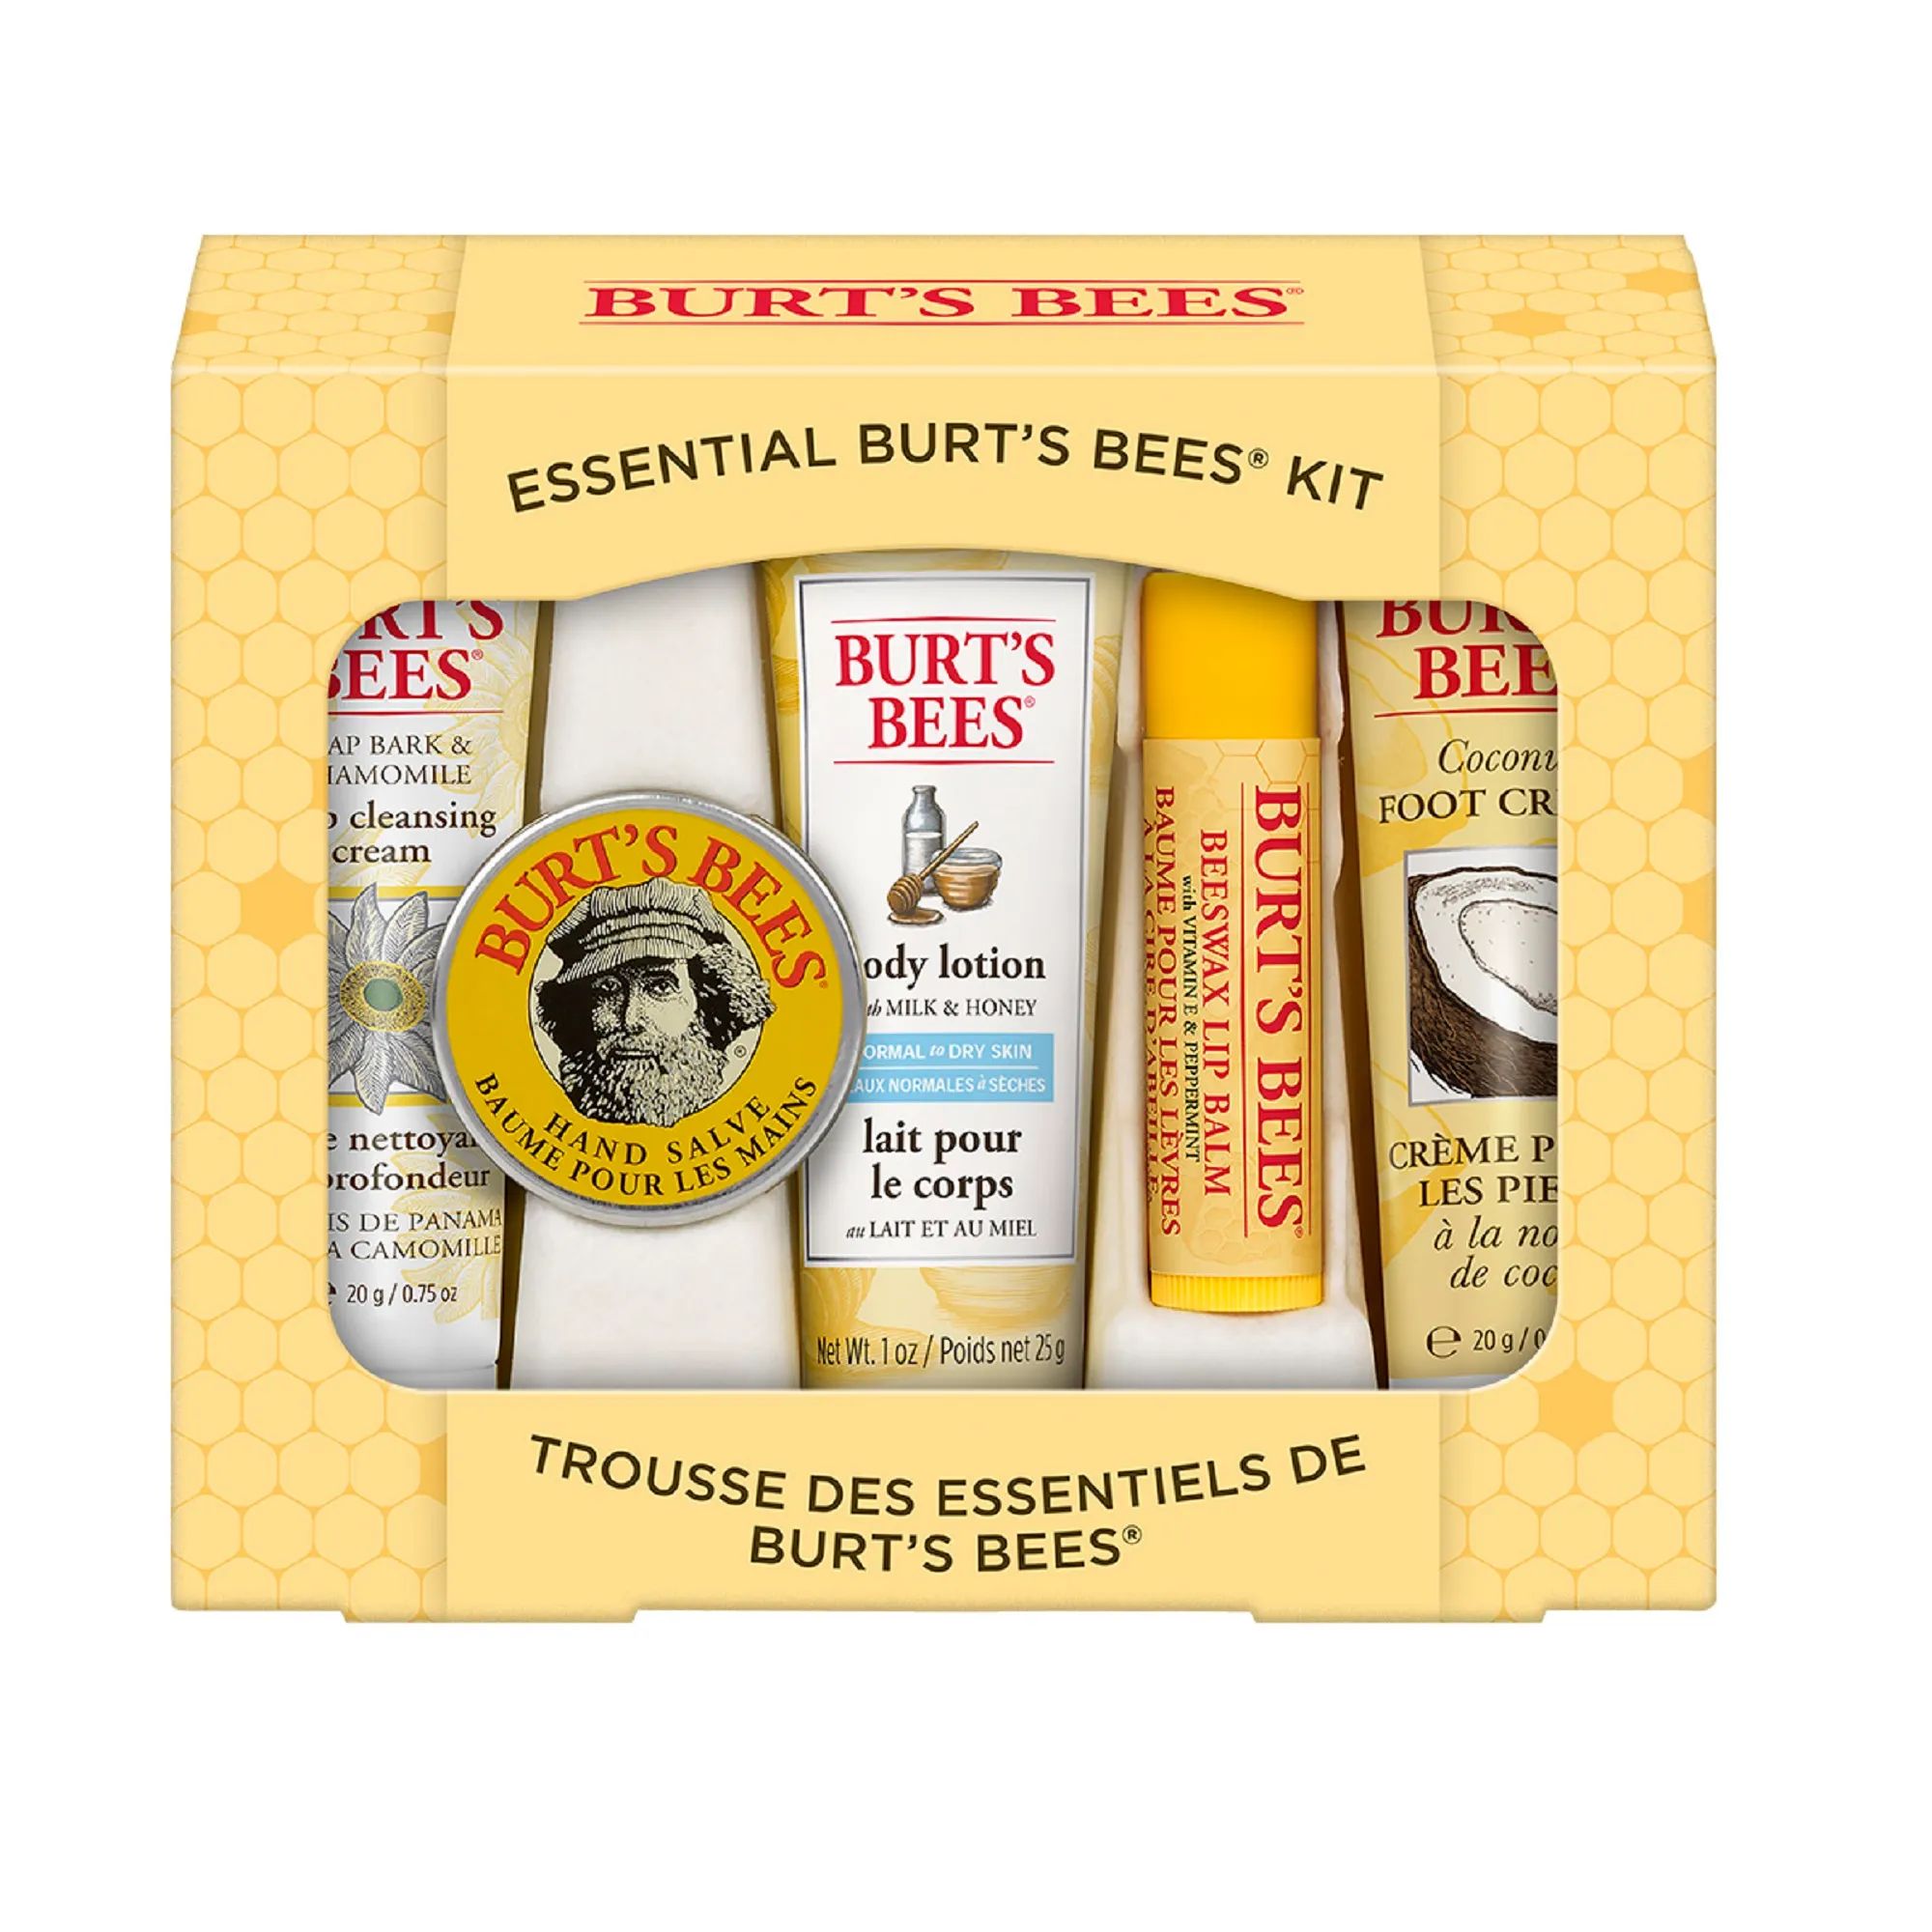 Give your loved one’s daily-use products a nourishing boost with this collection of natural ess... | Burt's Bees